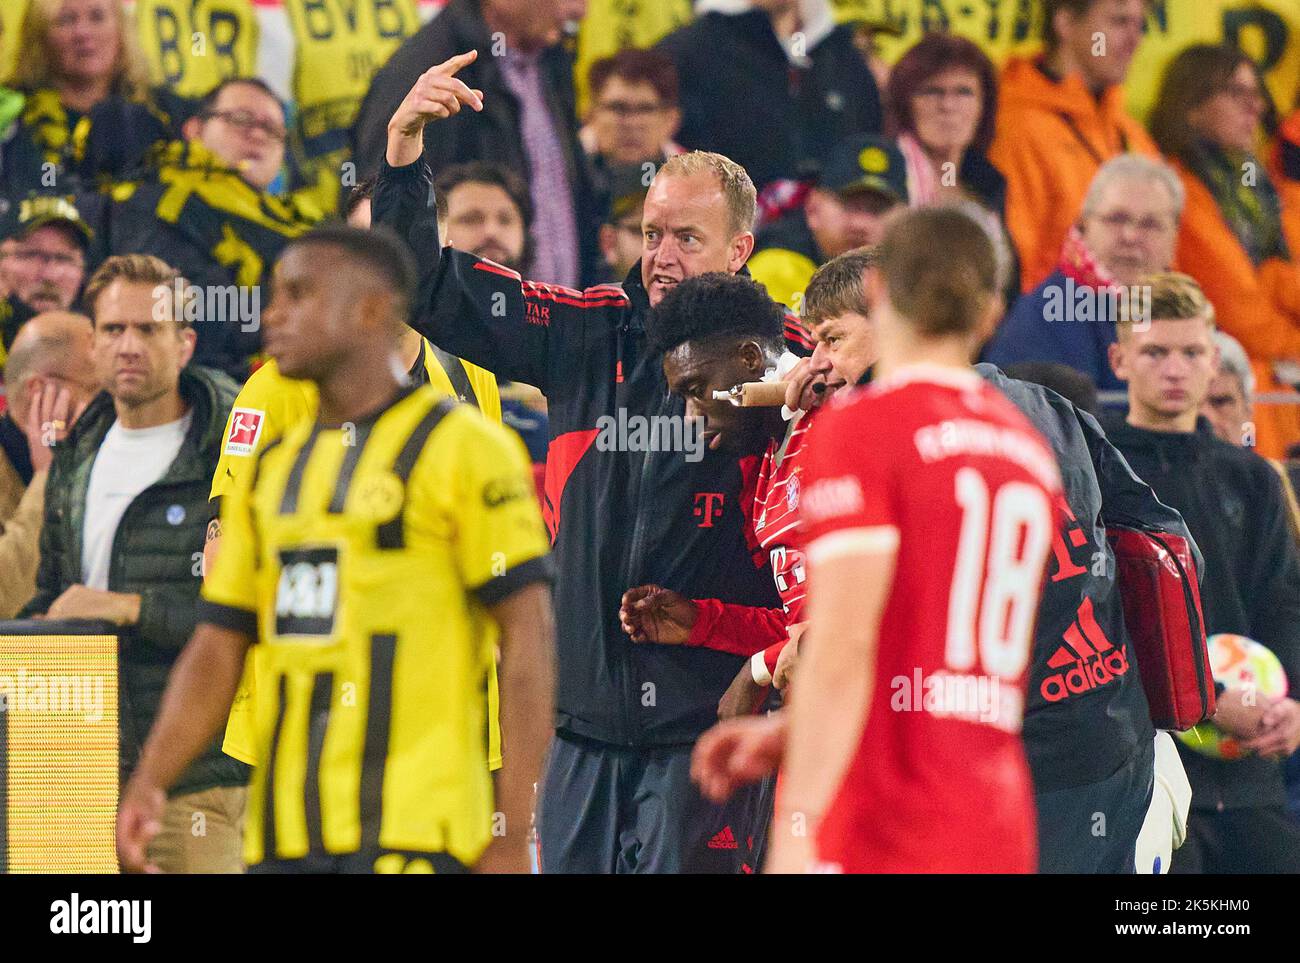 Alphonso DAVIES, FCB 19 head  injury, FCB team doctor, Dr.Jochen HAHNE,  in the match  BORUSSIA DORTMUND - FC BAYERN MUENCHEN 2-2 1.German Football League on Oct 8, 2022 in Dortmund, Germany. Season 2022/2023, matchday 9, 1.Bundesliga, FCB, München, 9.Spieltag © Peter Schatz / Alamy Live News    - DFL REGULATIONS PROHIBIT ANY USE OF PHOTOGRAPHS as IMAGE SEQUENCES and/or QUASI-VIDEO - Stock Photo